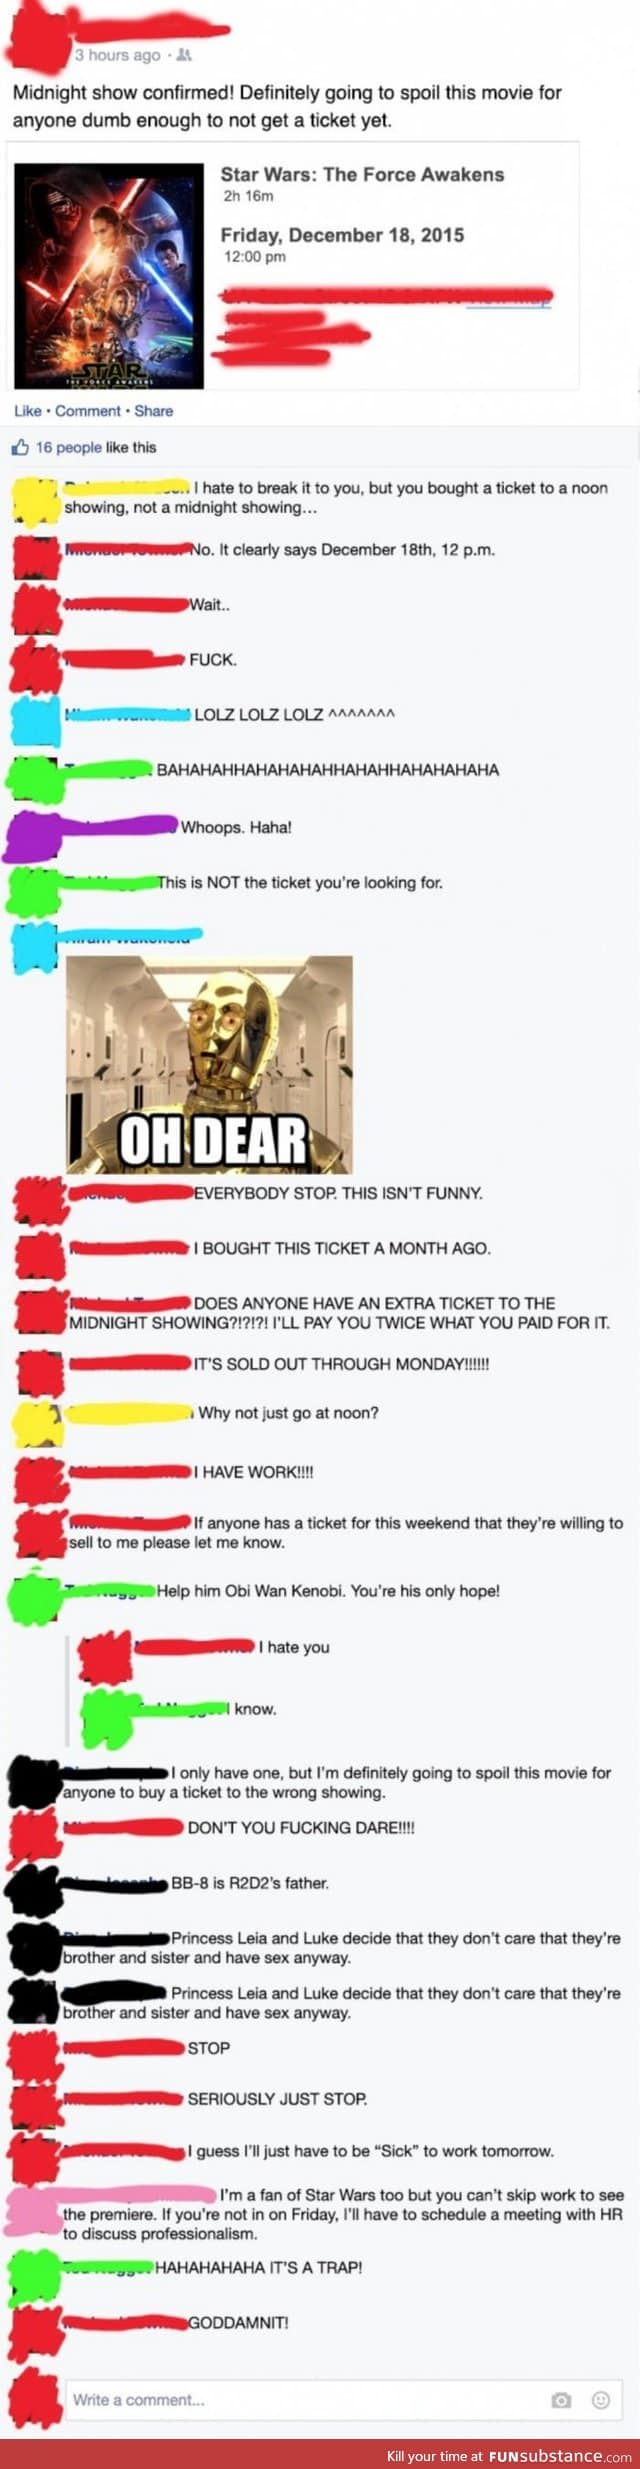 Star Wars fan promises to spoil The Force Awakens and realizes he booked the wrong ticket